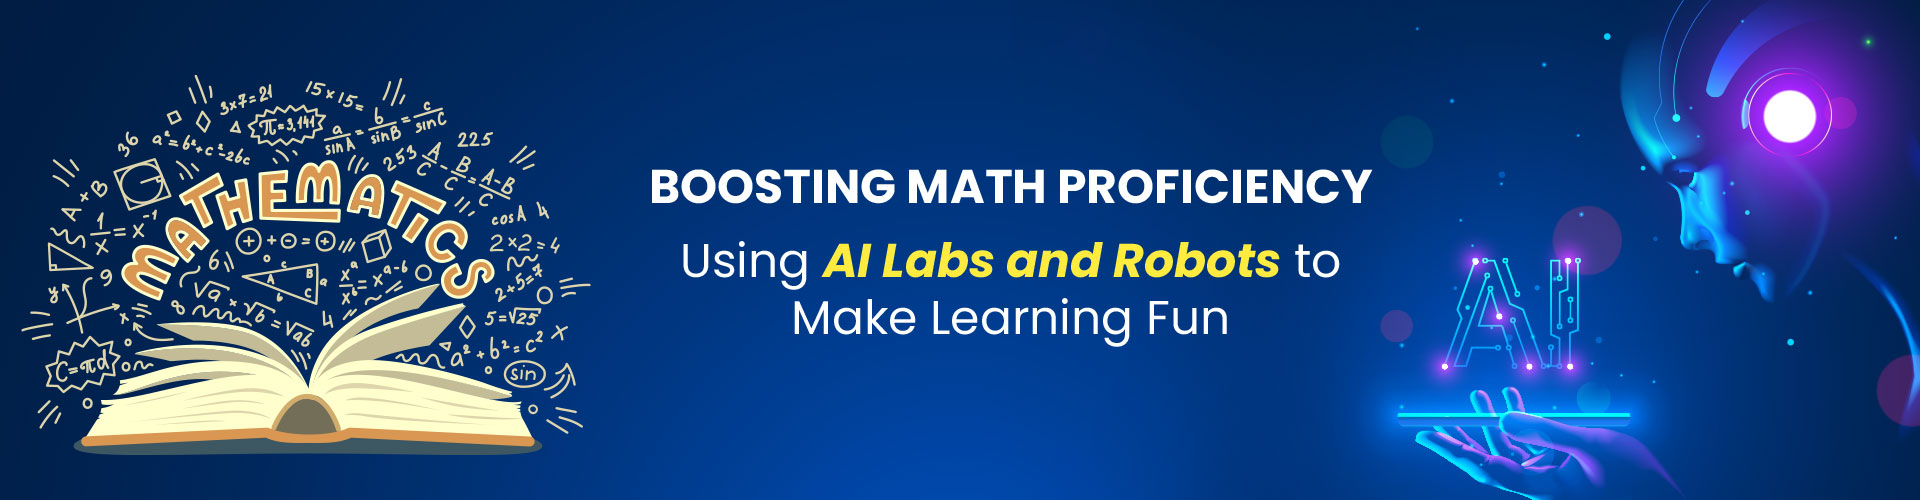 Boosting Math Proficiency: Using AI Labs and Robots to Make Learning Fun